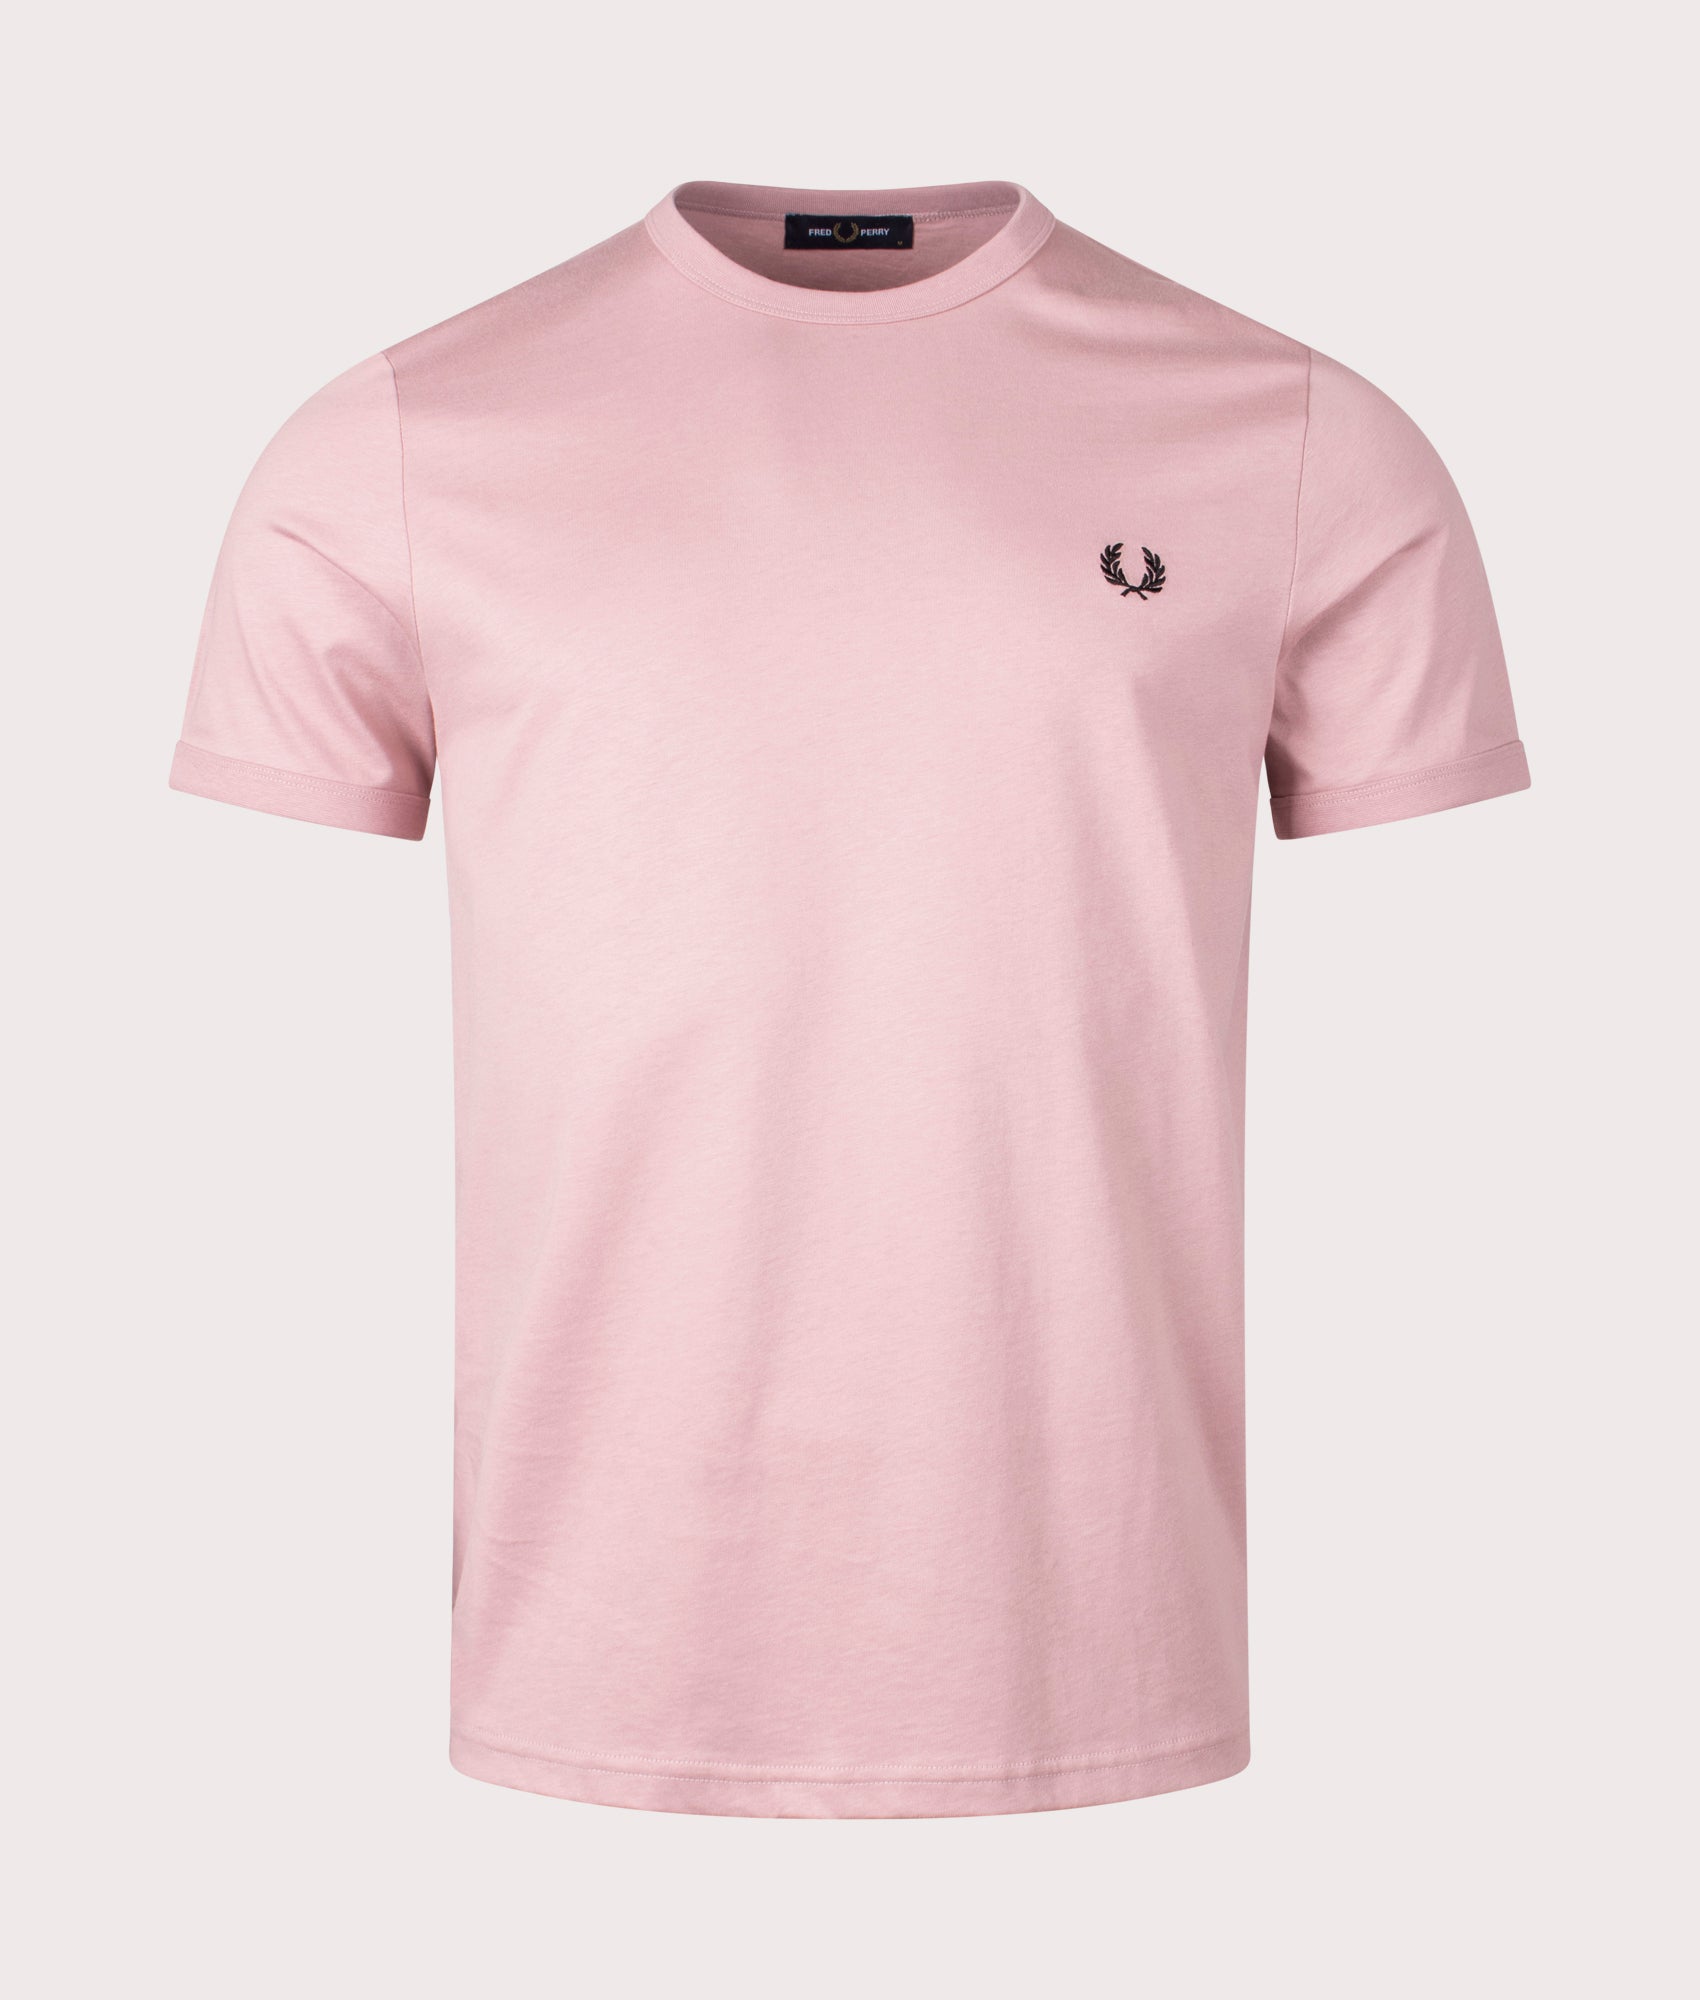 Fred Perry Mens Ringer T-Shirt - Colour: S51 Dusty Rose Pink - Size: XL